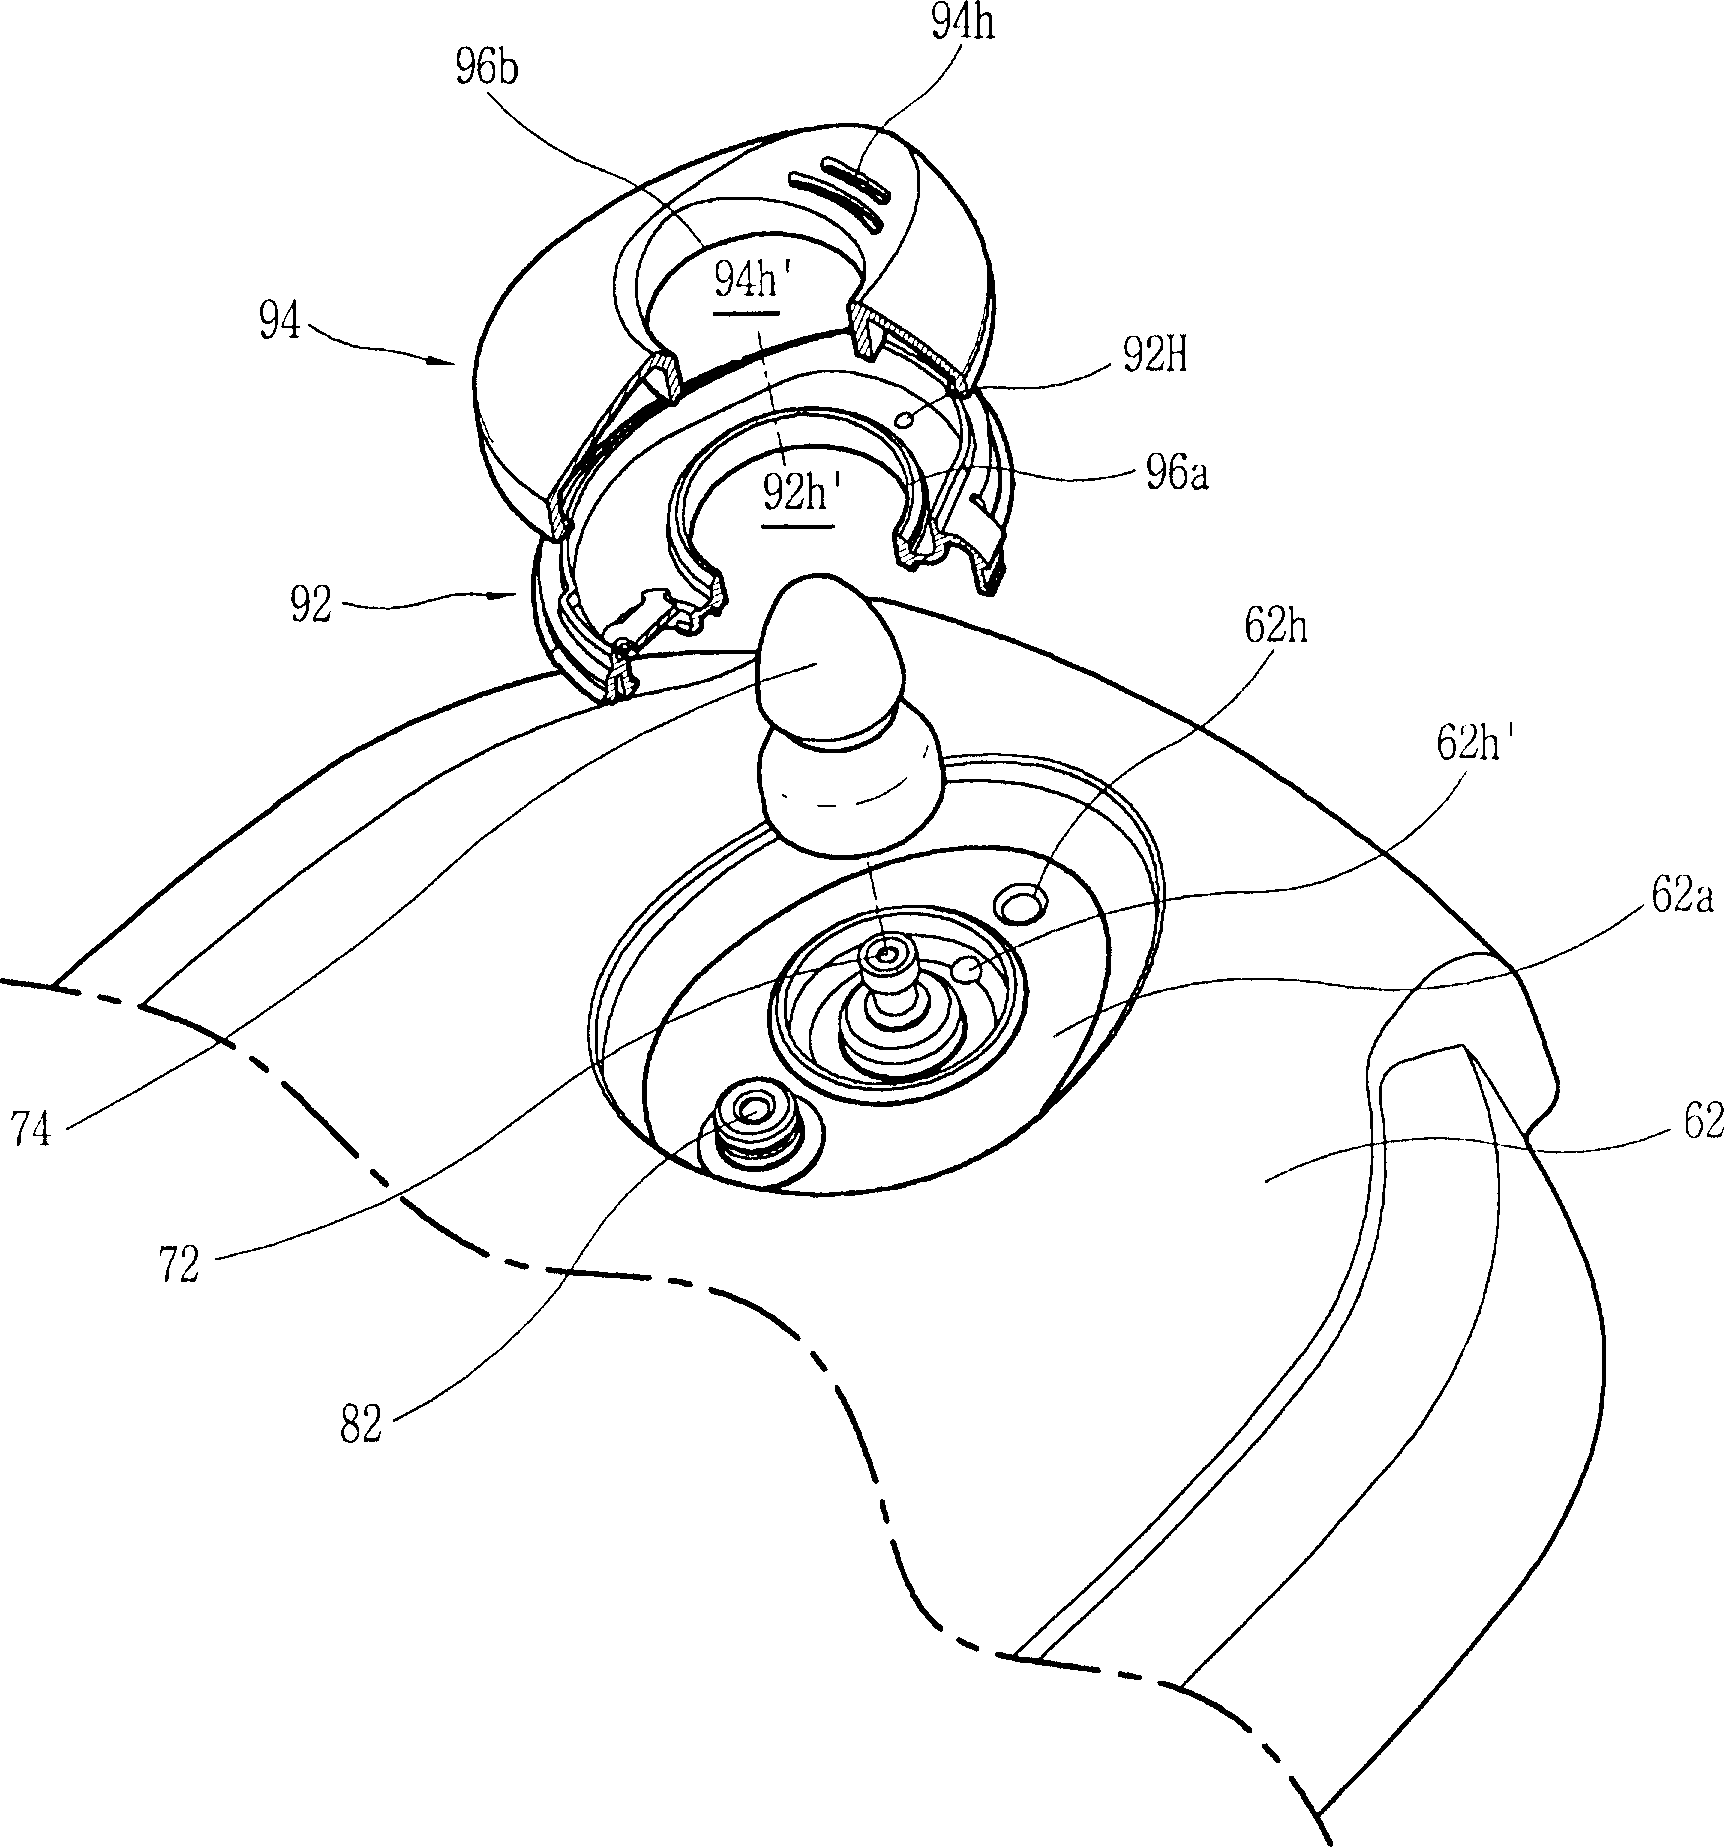 Steam discharging device for electric pressure cooker